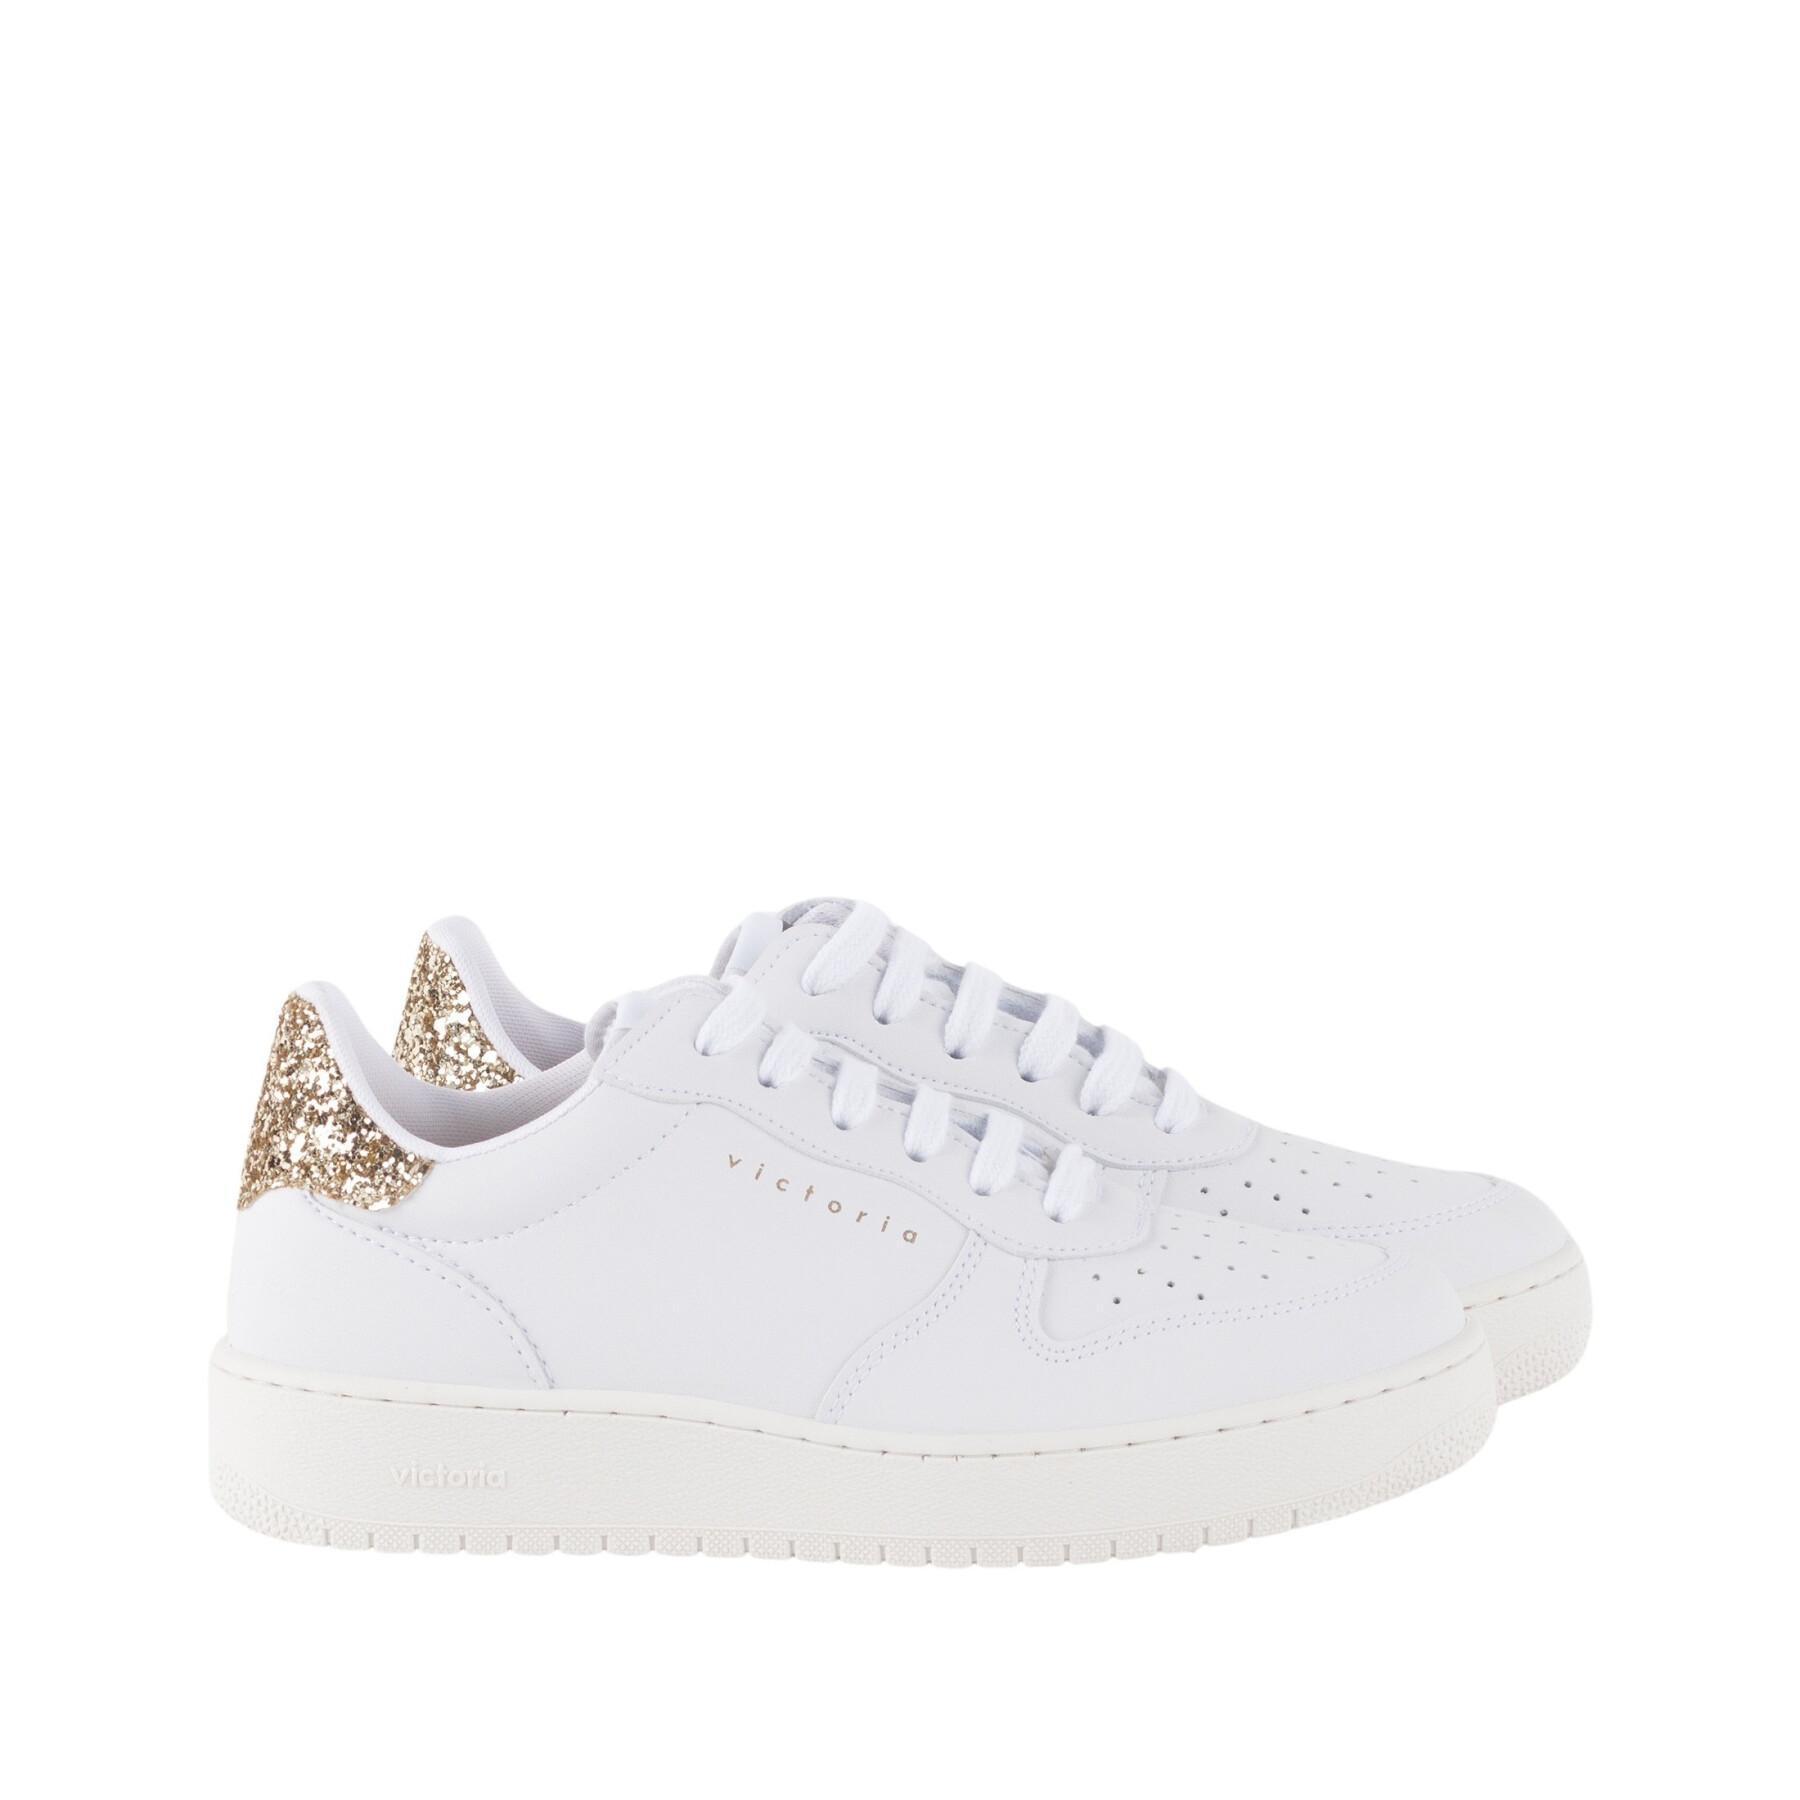 Women's leather and pallet sneakers Victoria Madrid